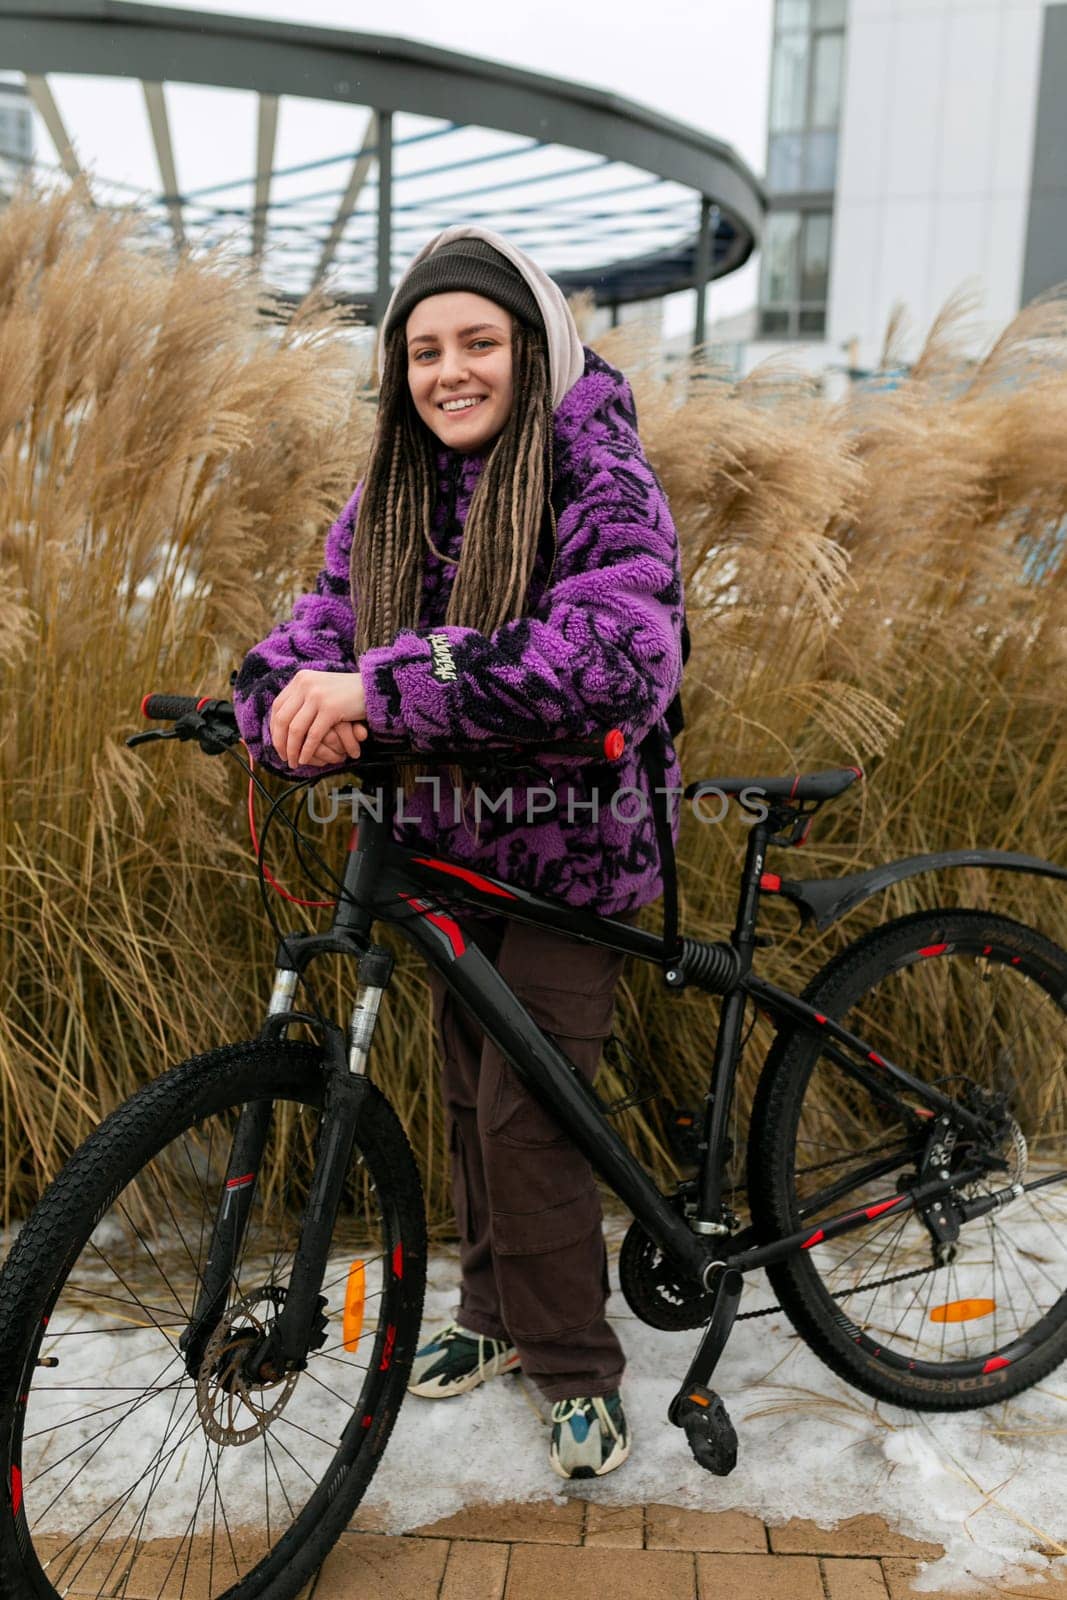 Bicycle rental concept. Young woman with dreadlocks rides a bicycle in the city by TRMK